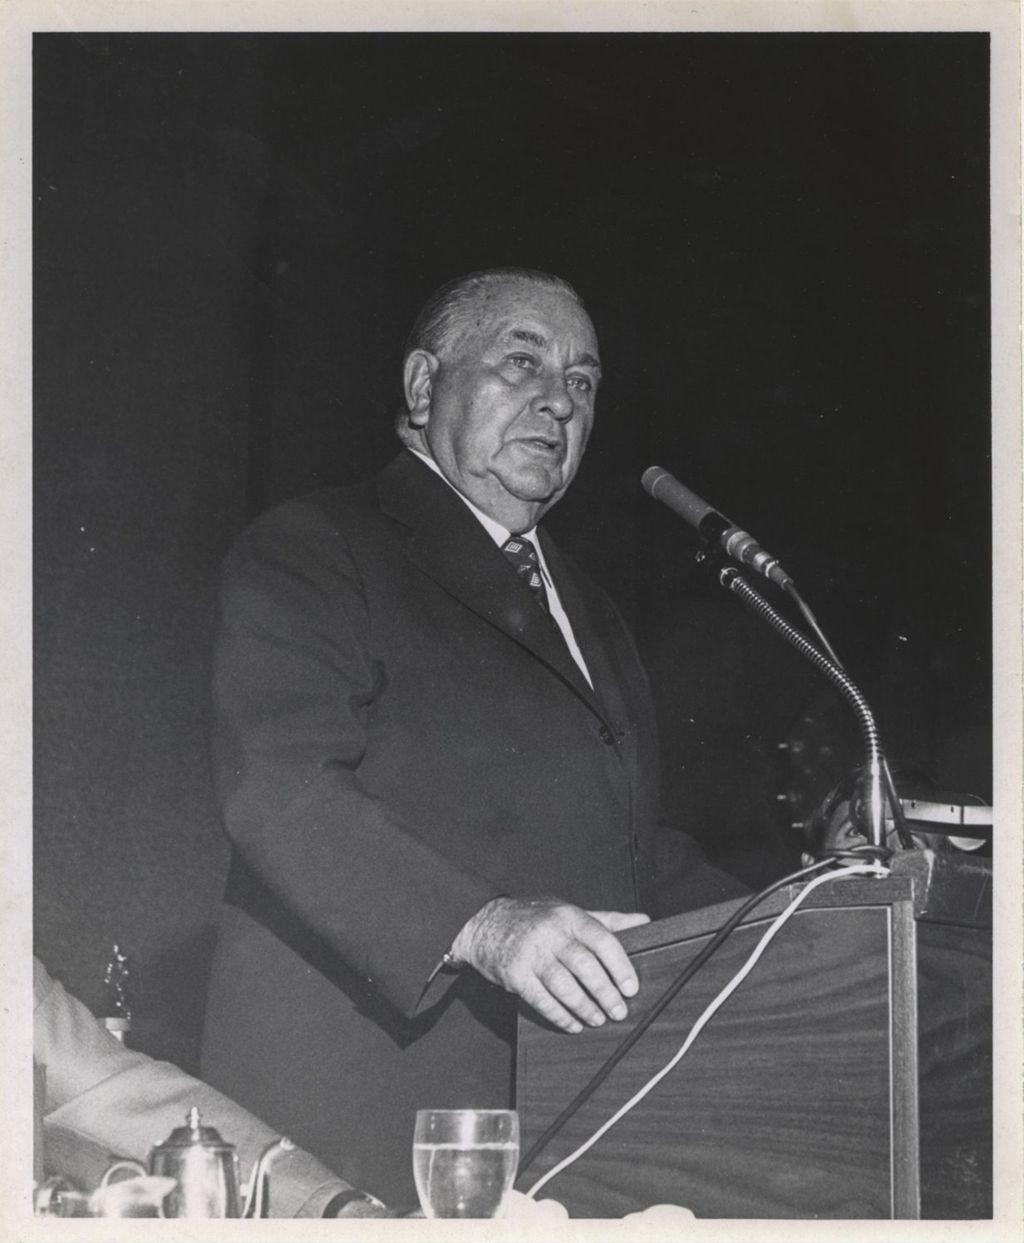 Richard J. Daley speaking at re-election rally